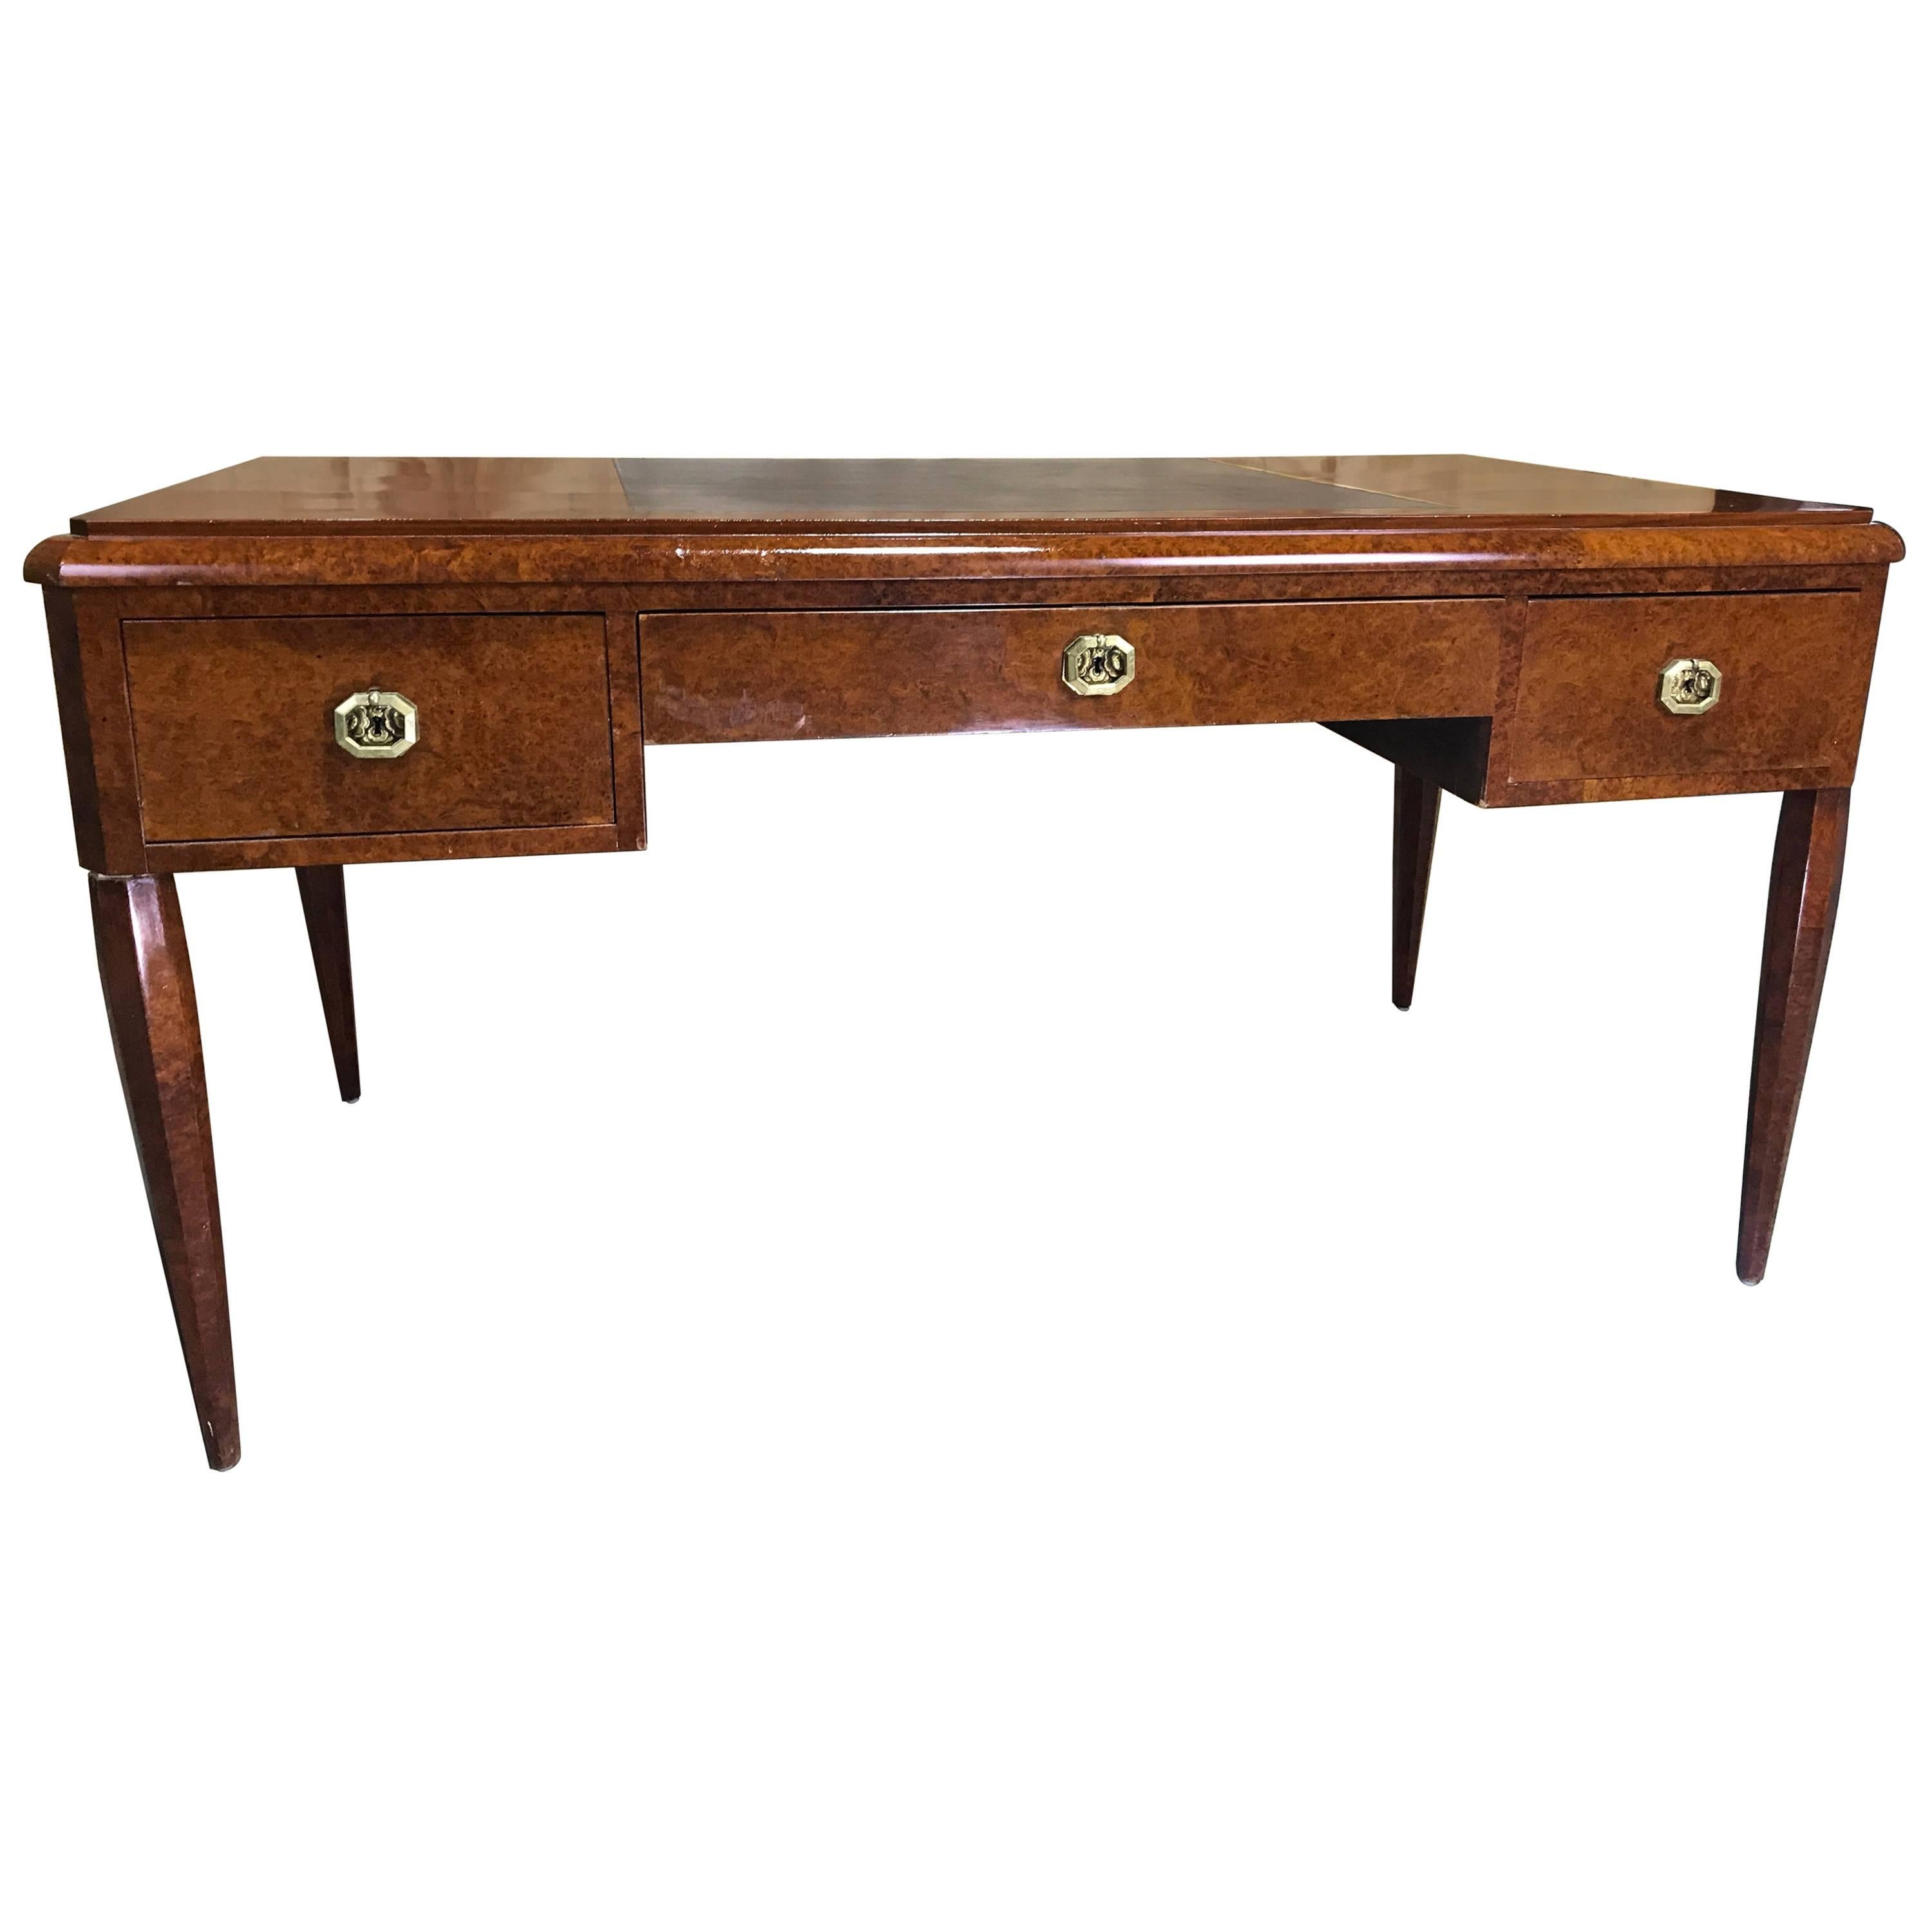 French Art Deco Burl Wood and Leather Desk